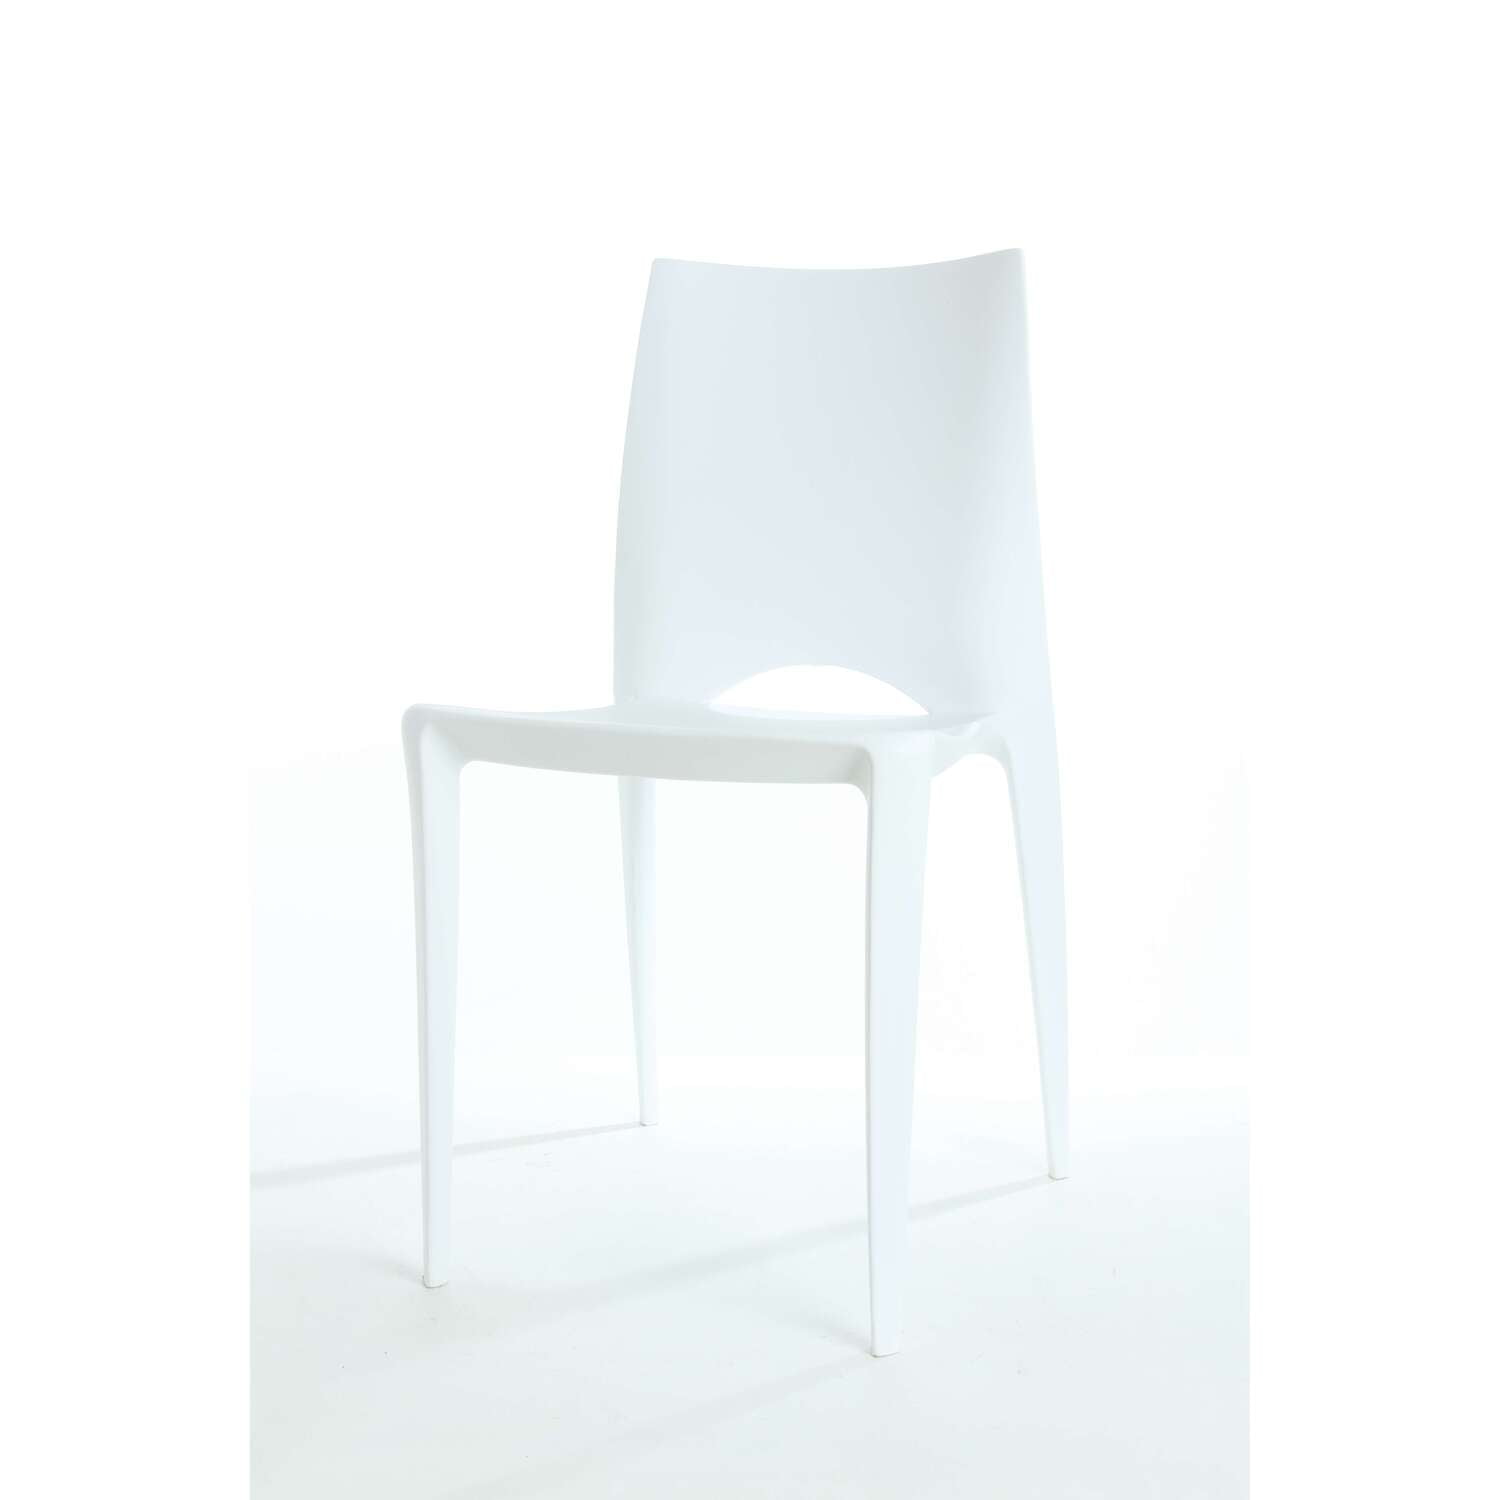 Rpp-crescent-wh-4 Crescent Polyproplylene Stackable Chair - White - 32 In. - Set Of 4